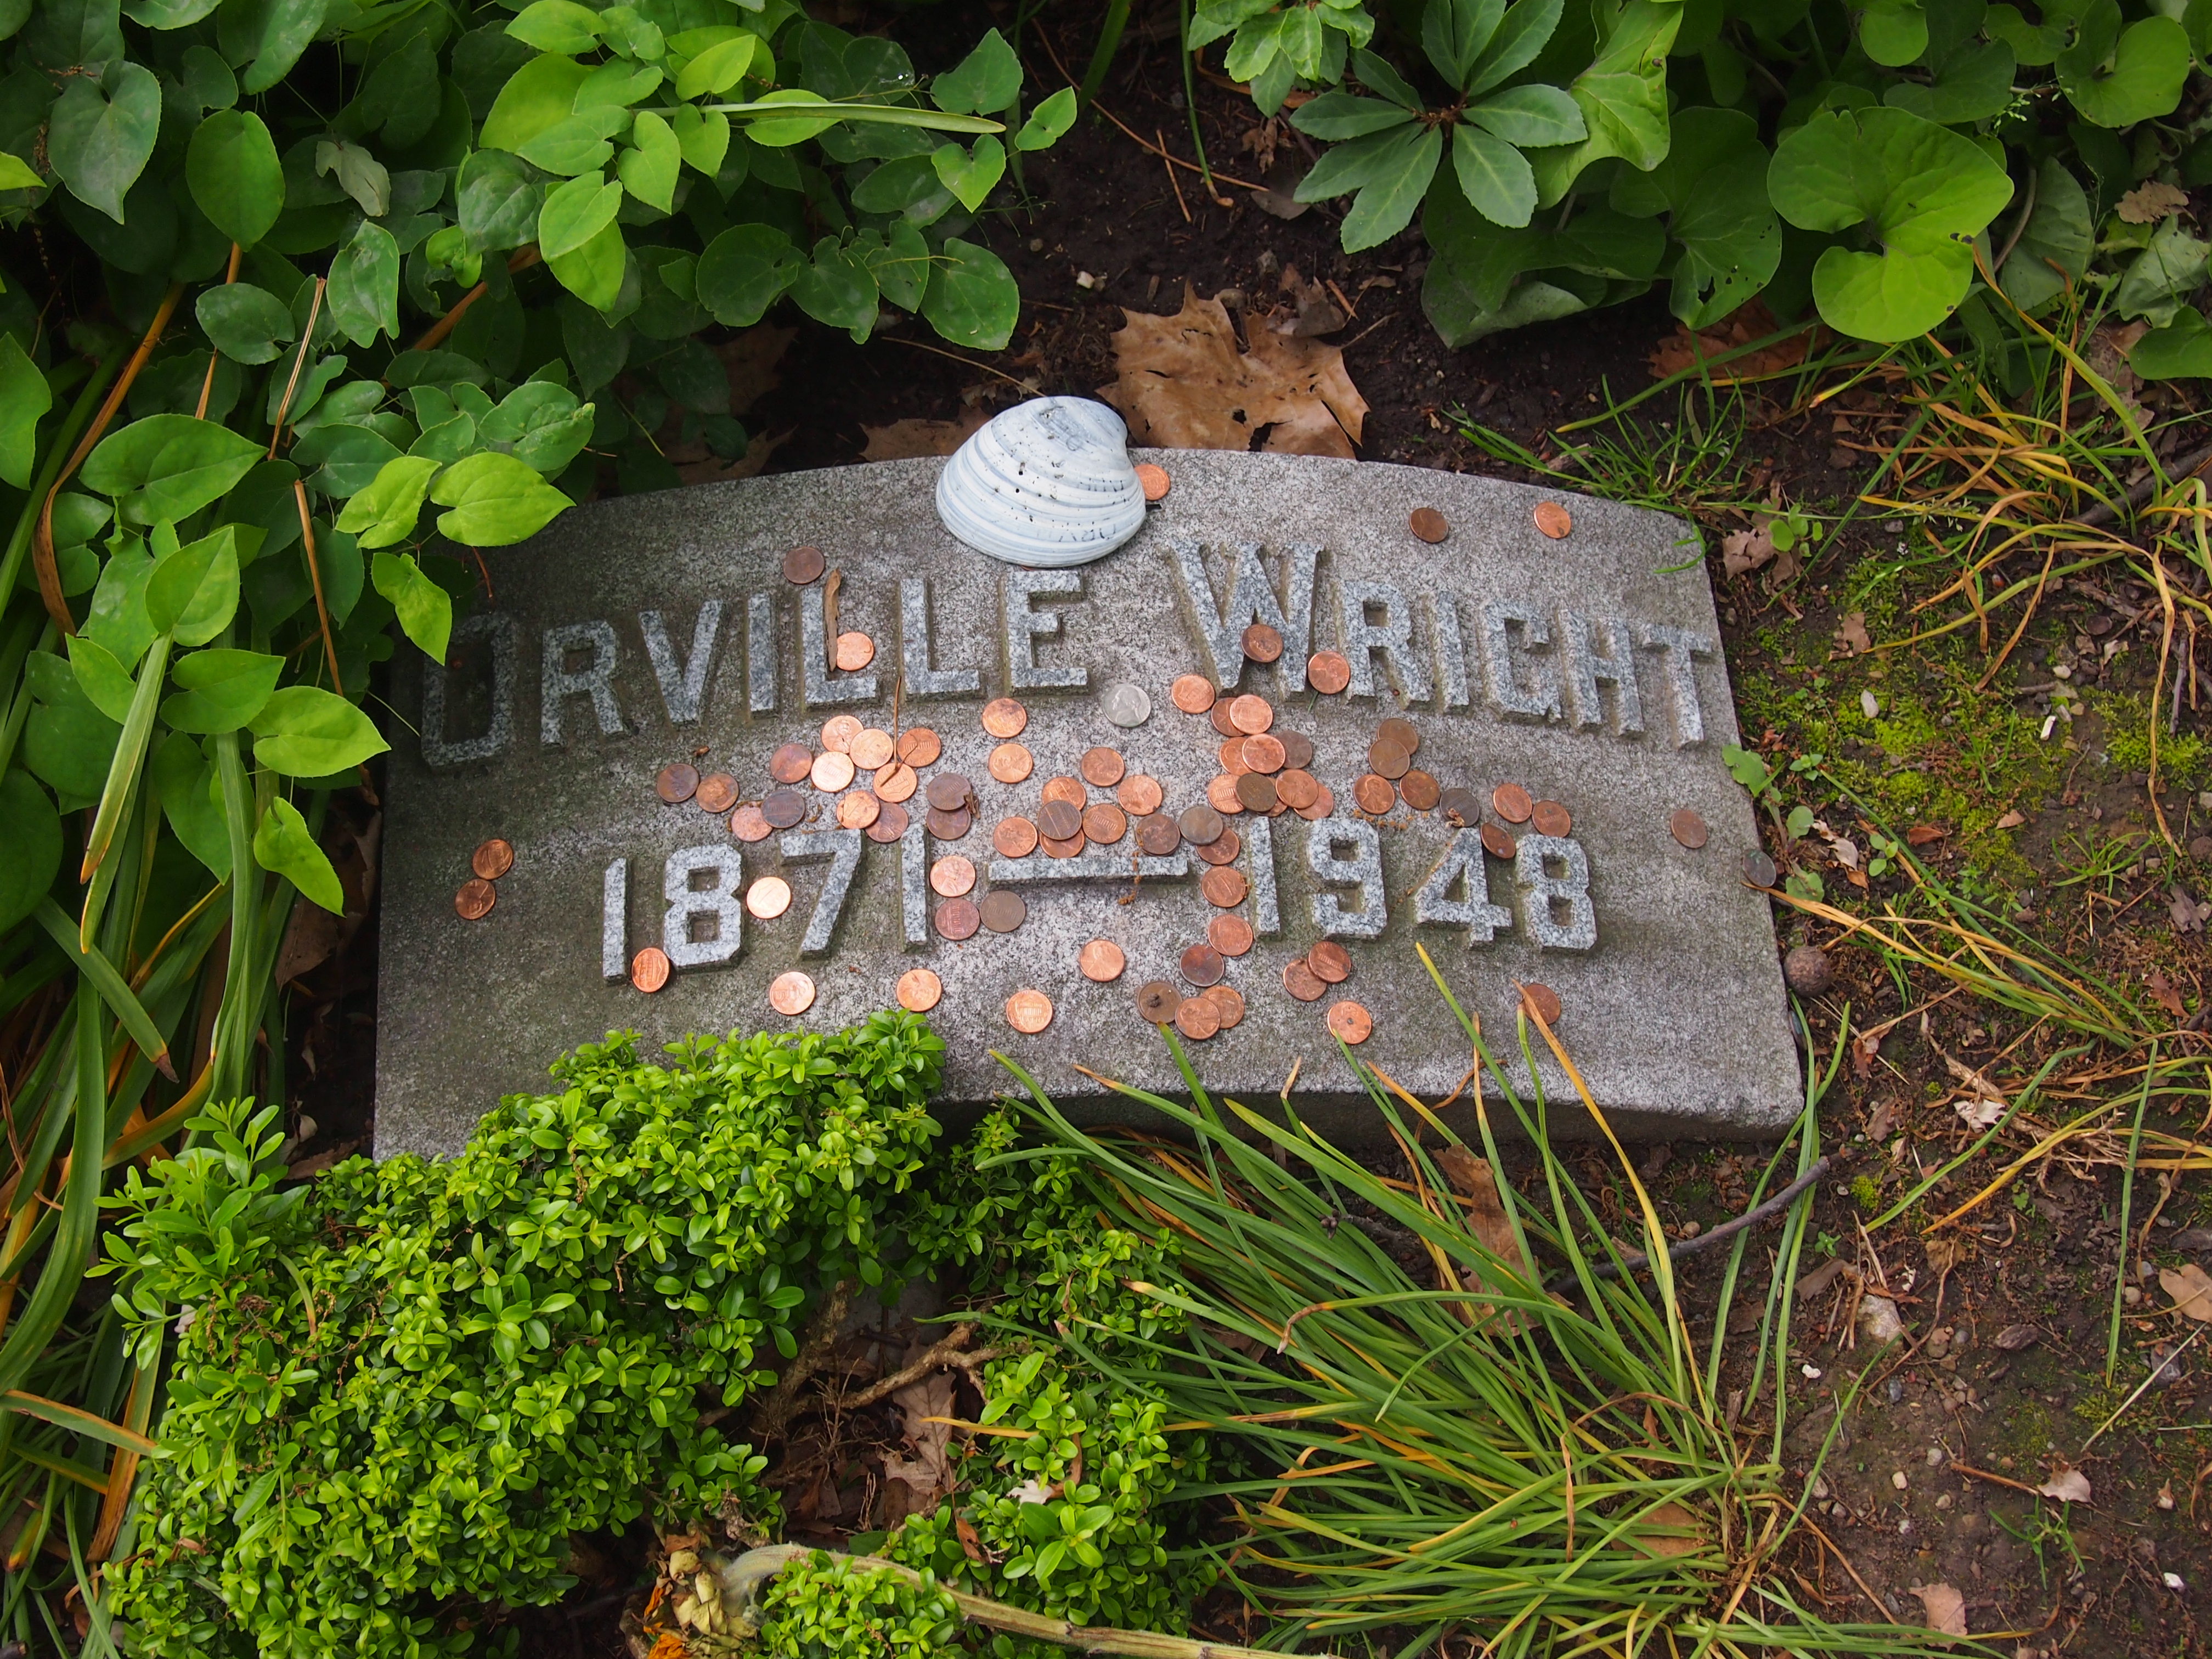 Woodland Cemetery, Dayton - Wirght Brothers grave